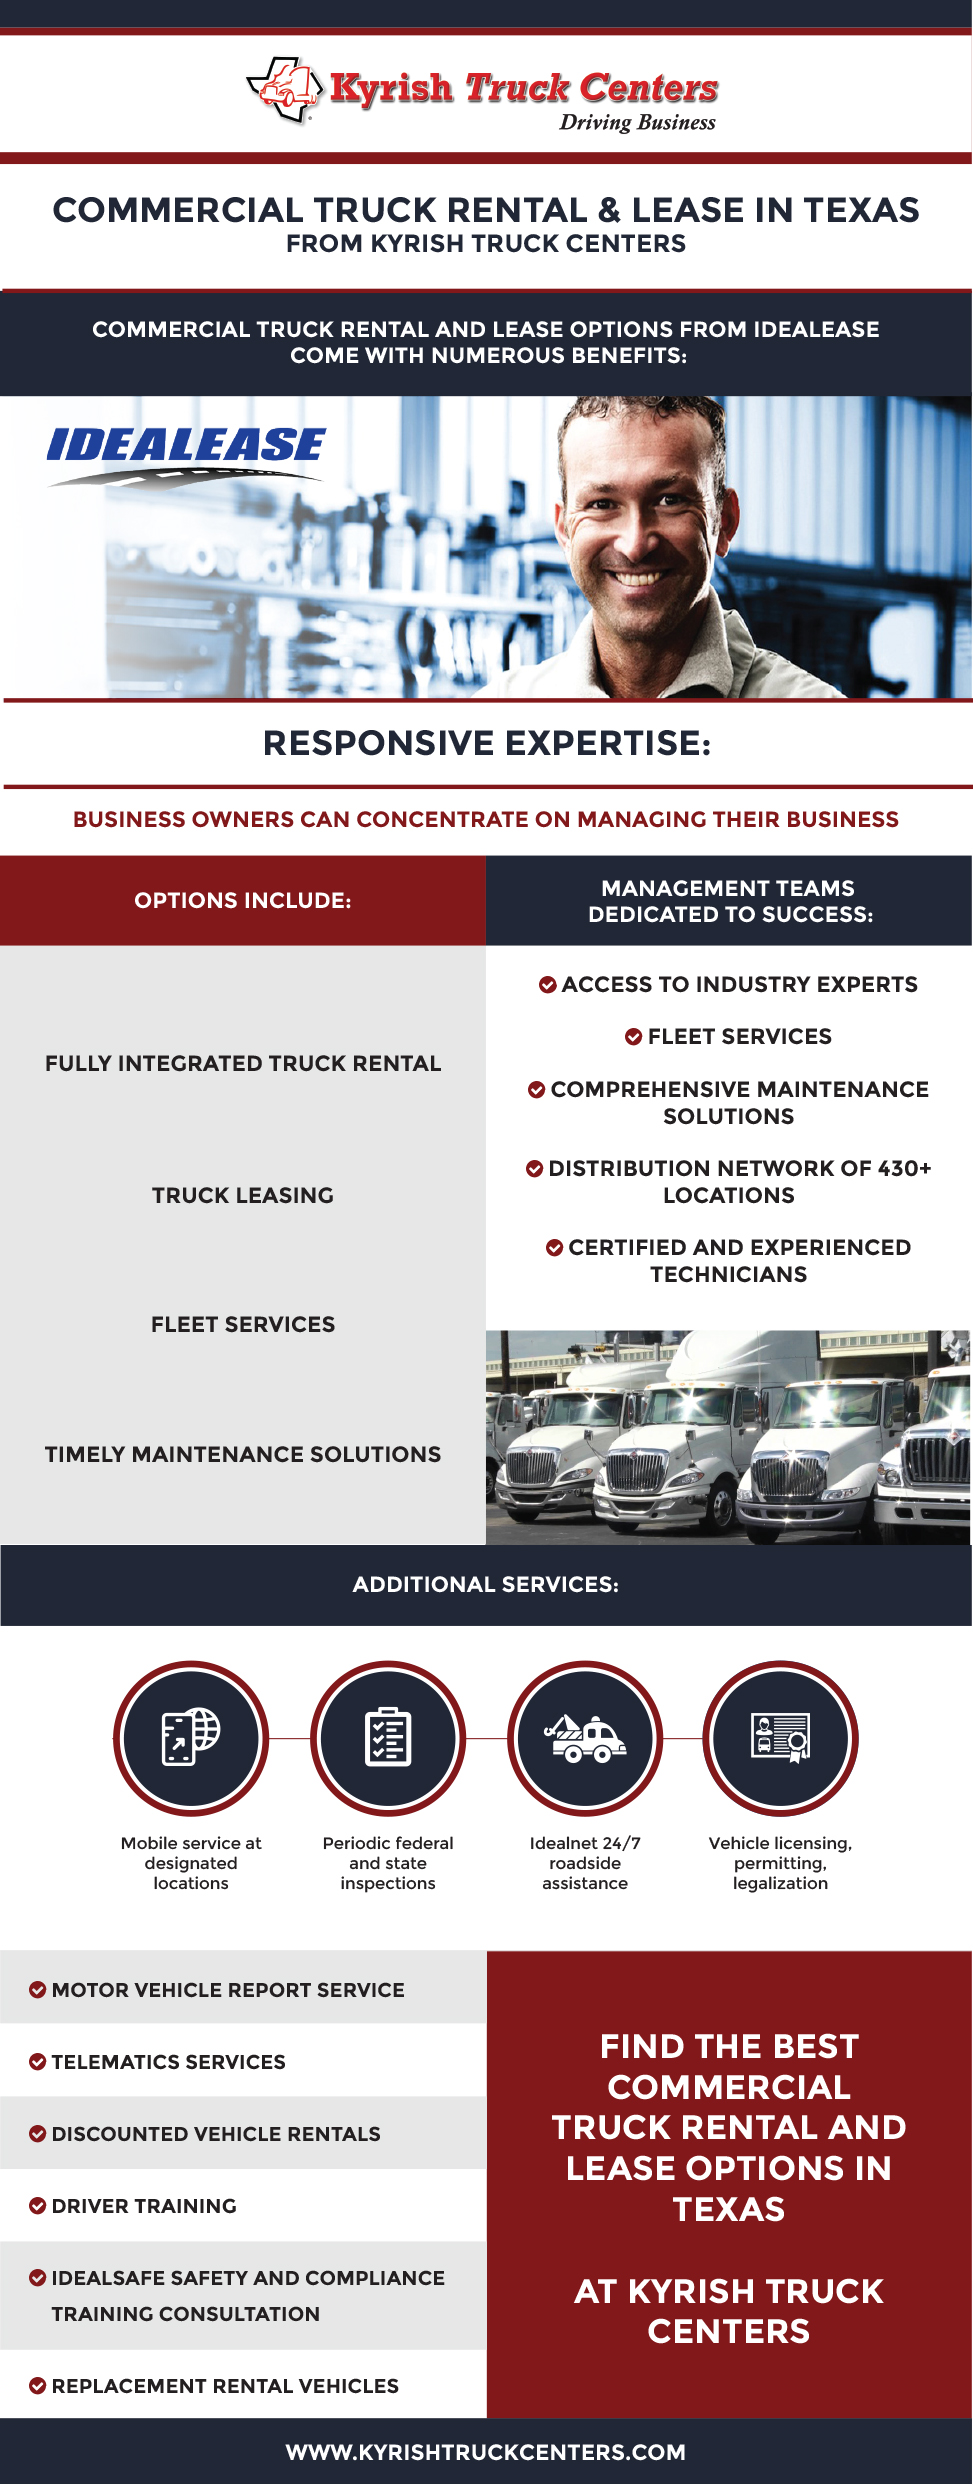 Commercial Truck Rental/Lease Services Offered by Kyrish Truck Centers